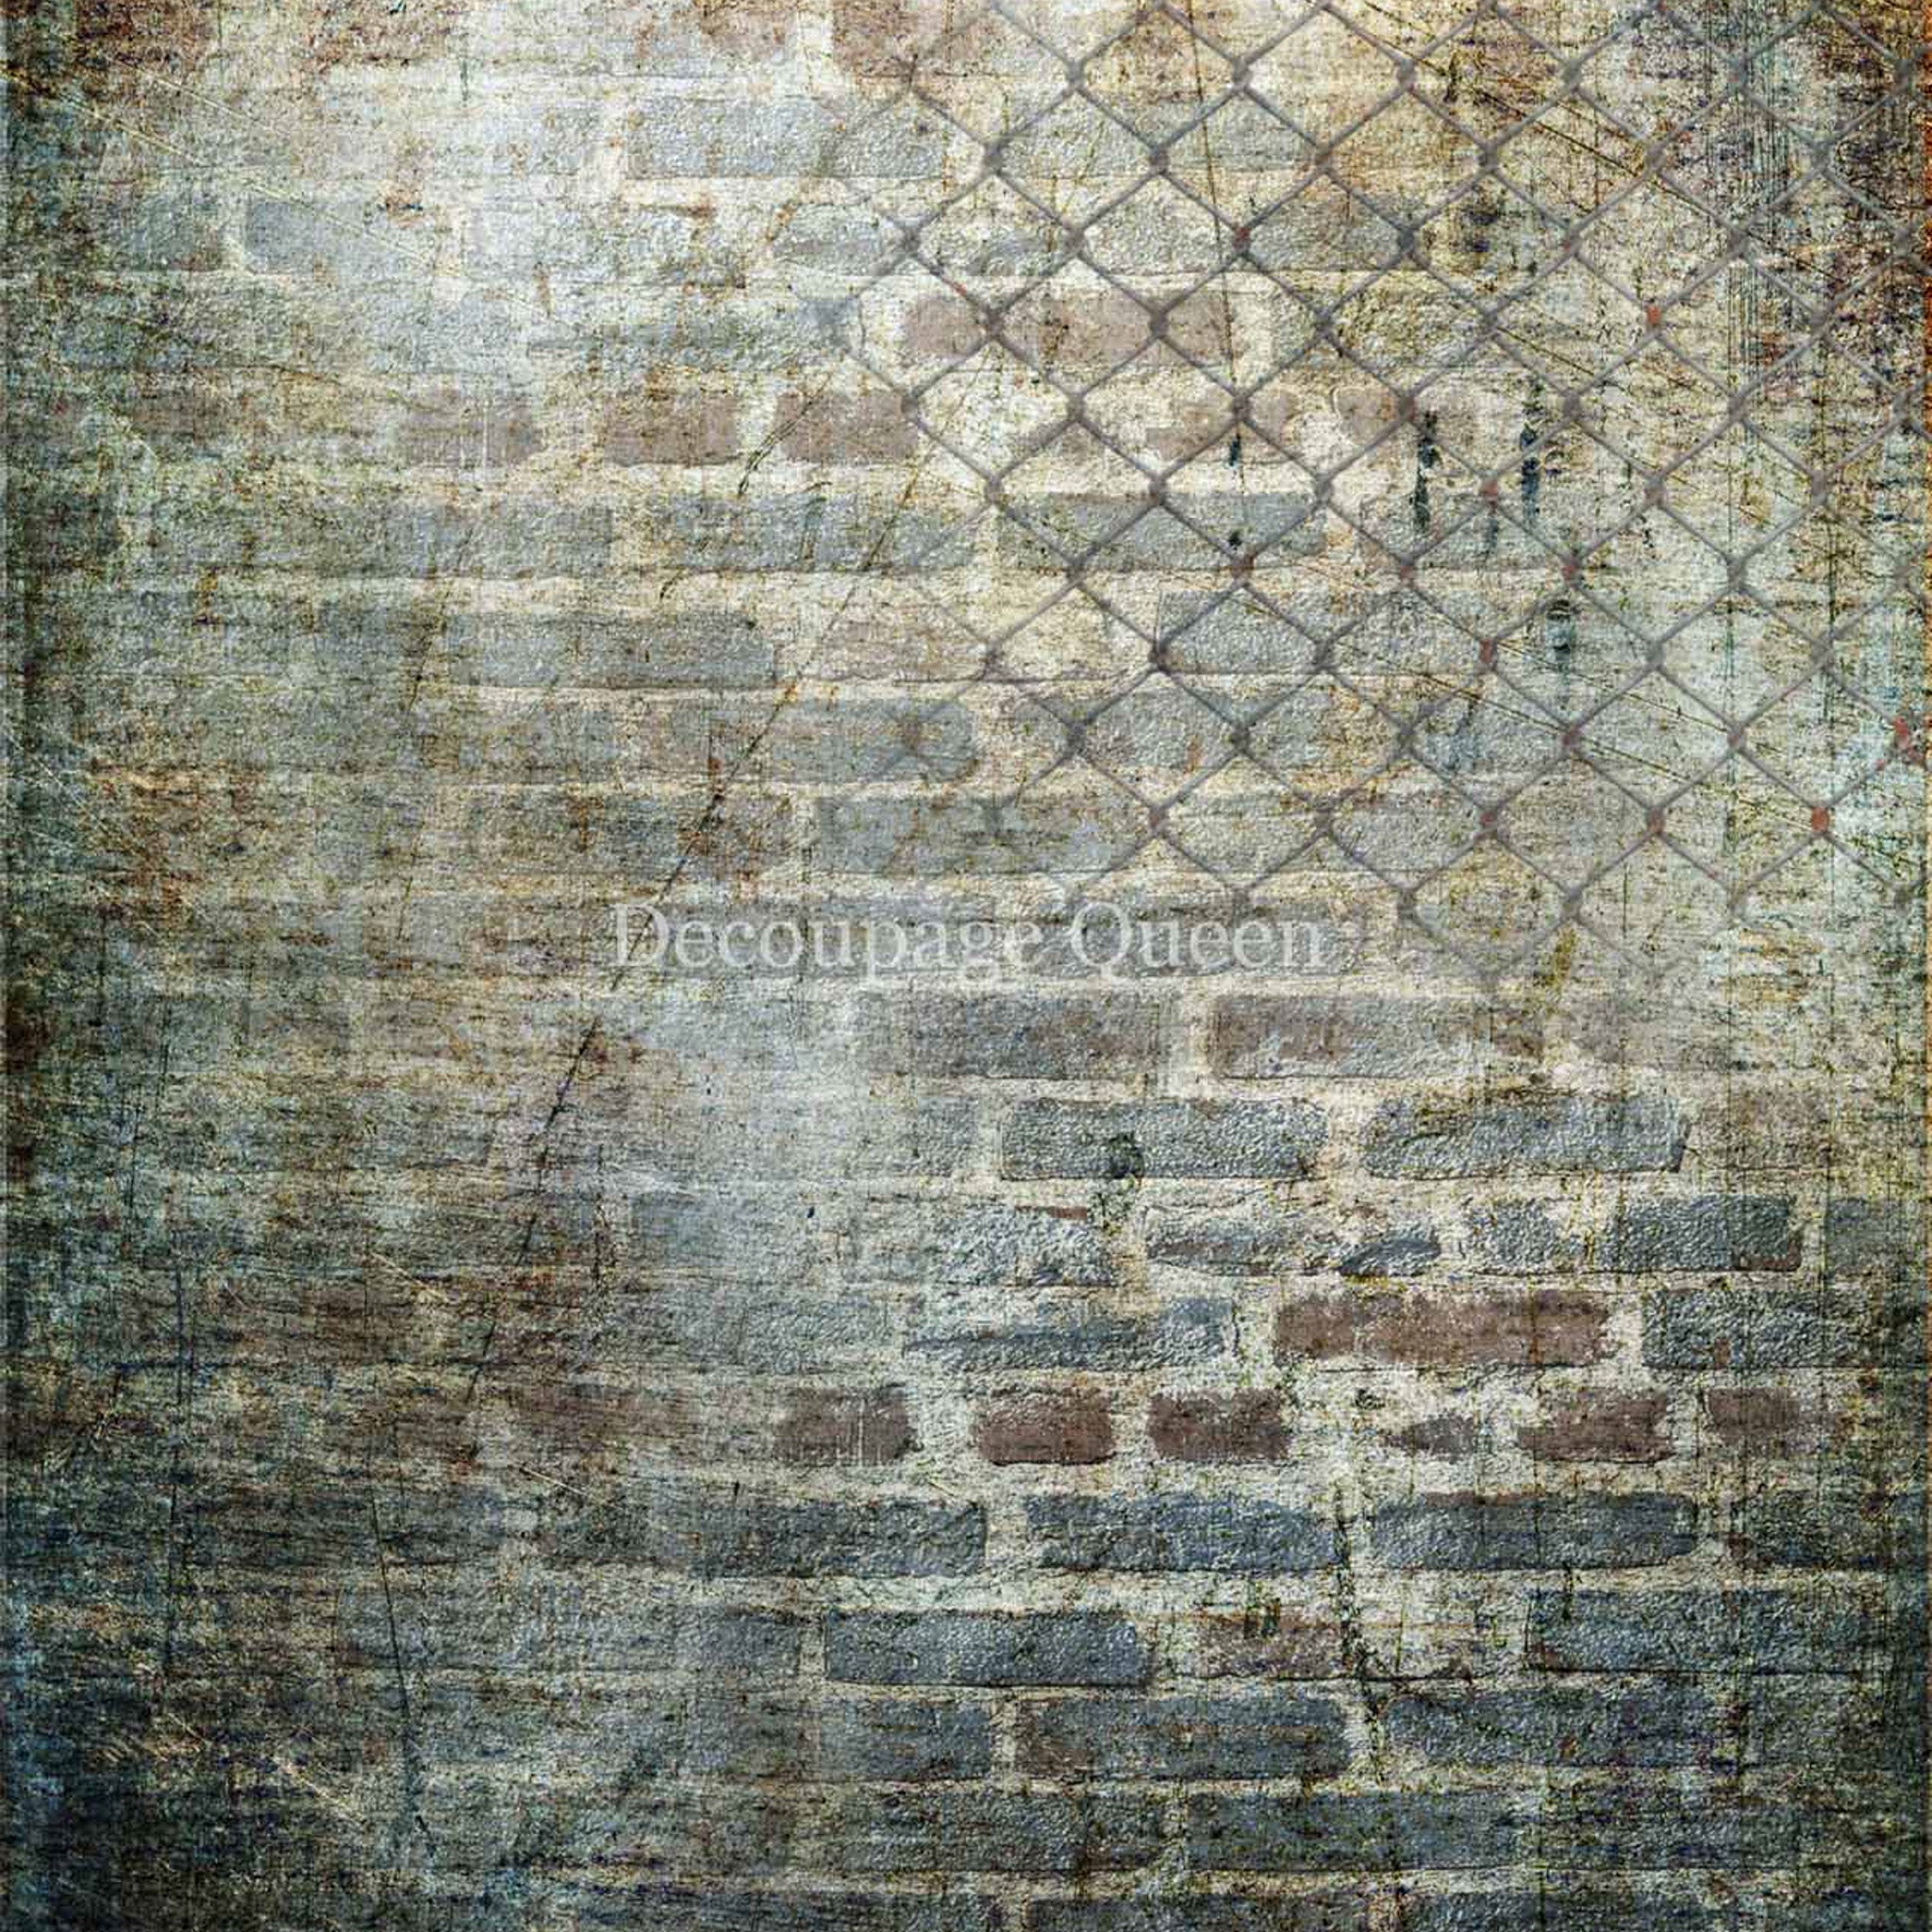 A distressed brick wall design with an overlay of a faded chain link fence on the top right.